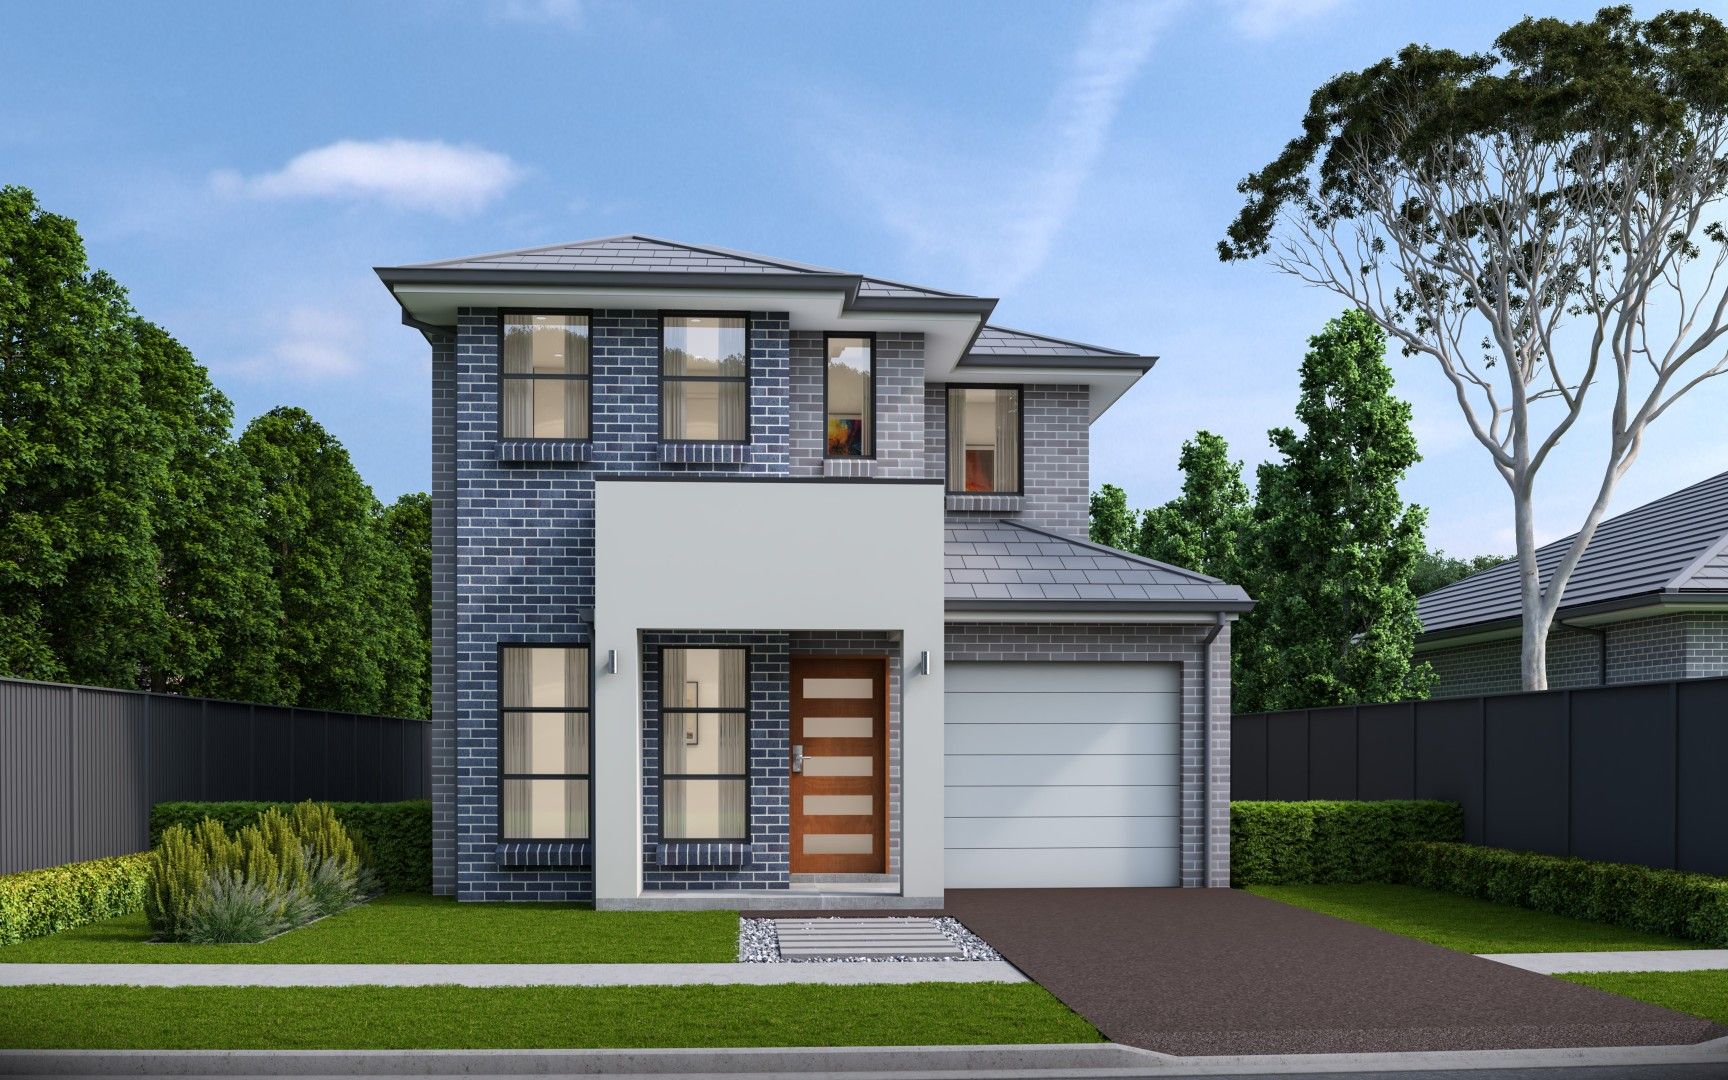 Lot 20 Meering St (65-75 Sixteenth Ave), Austral NSW 2179, Image 0